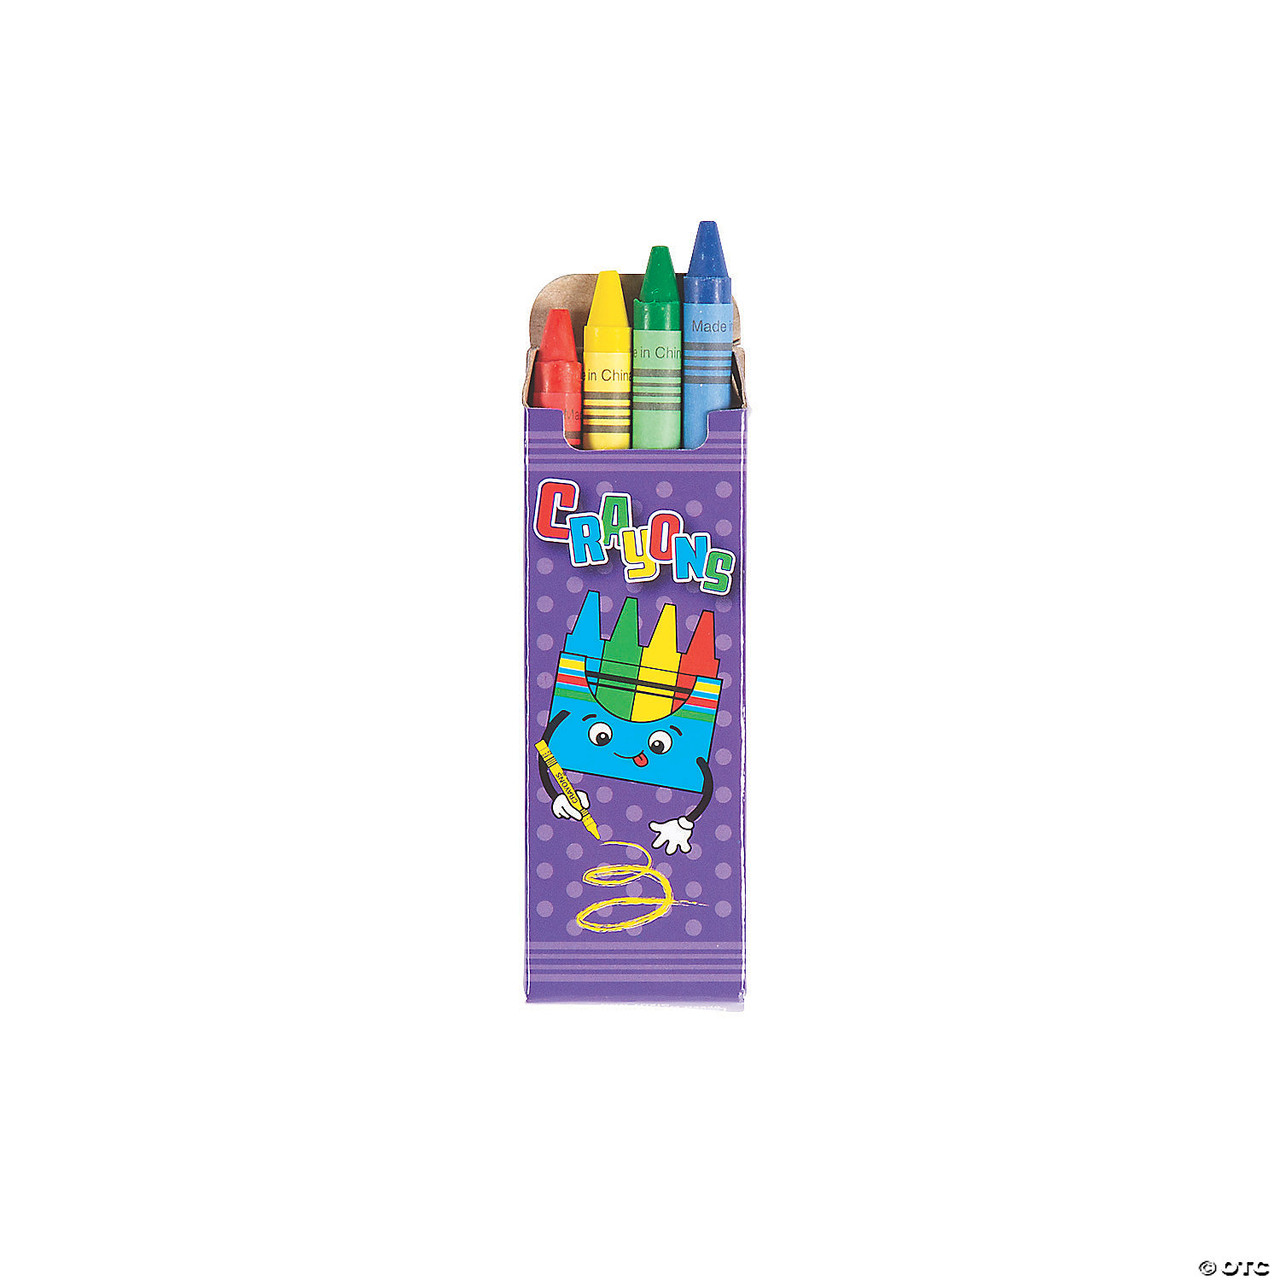 12 Assorted Colors Crayons Sets